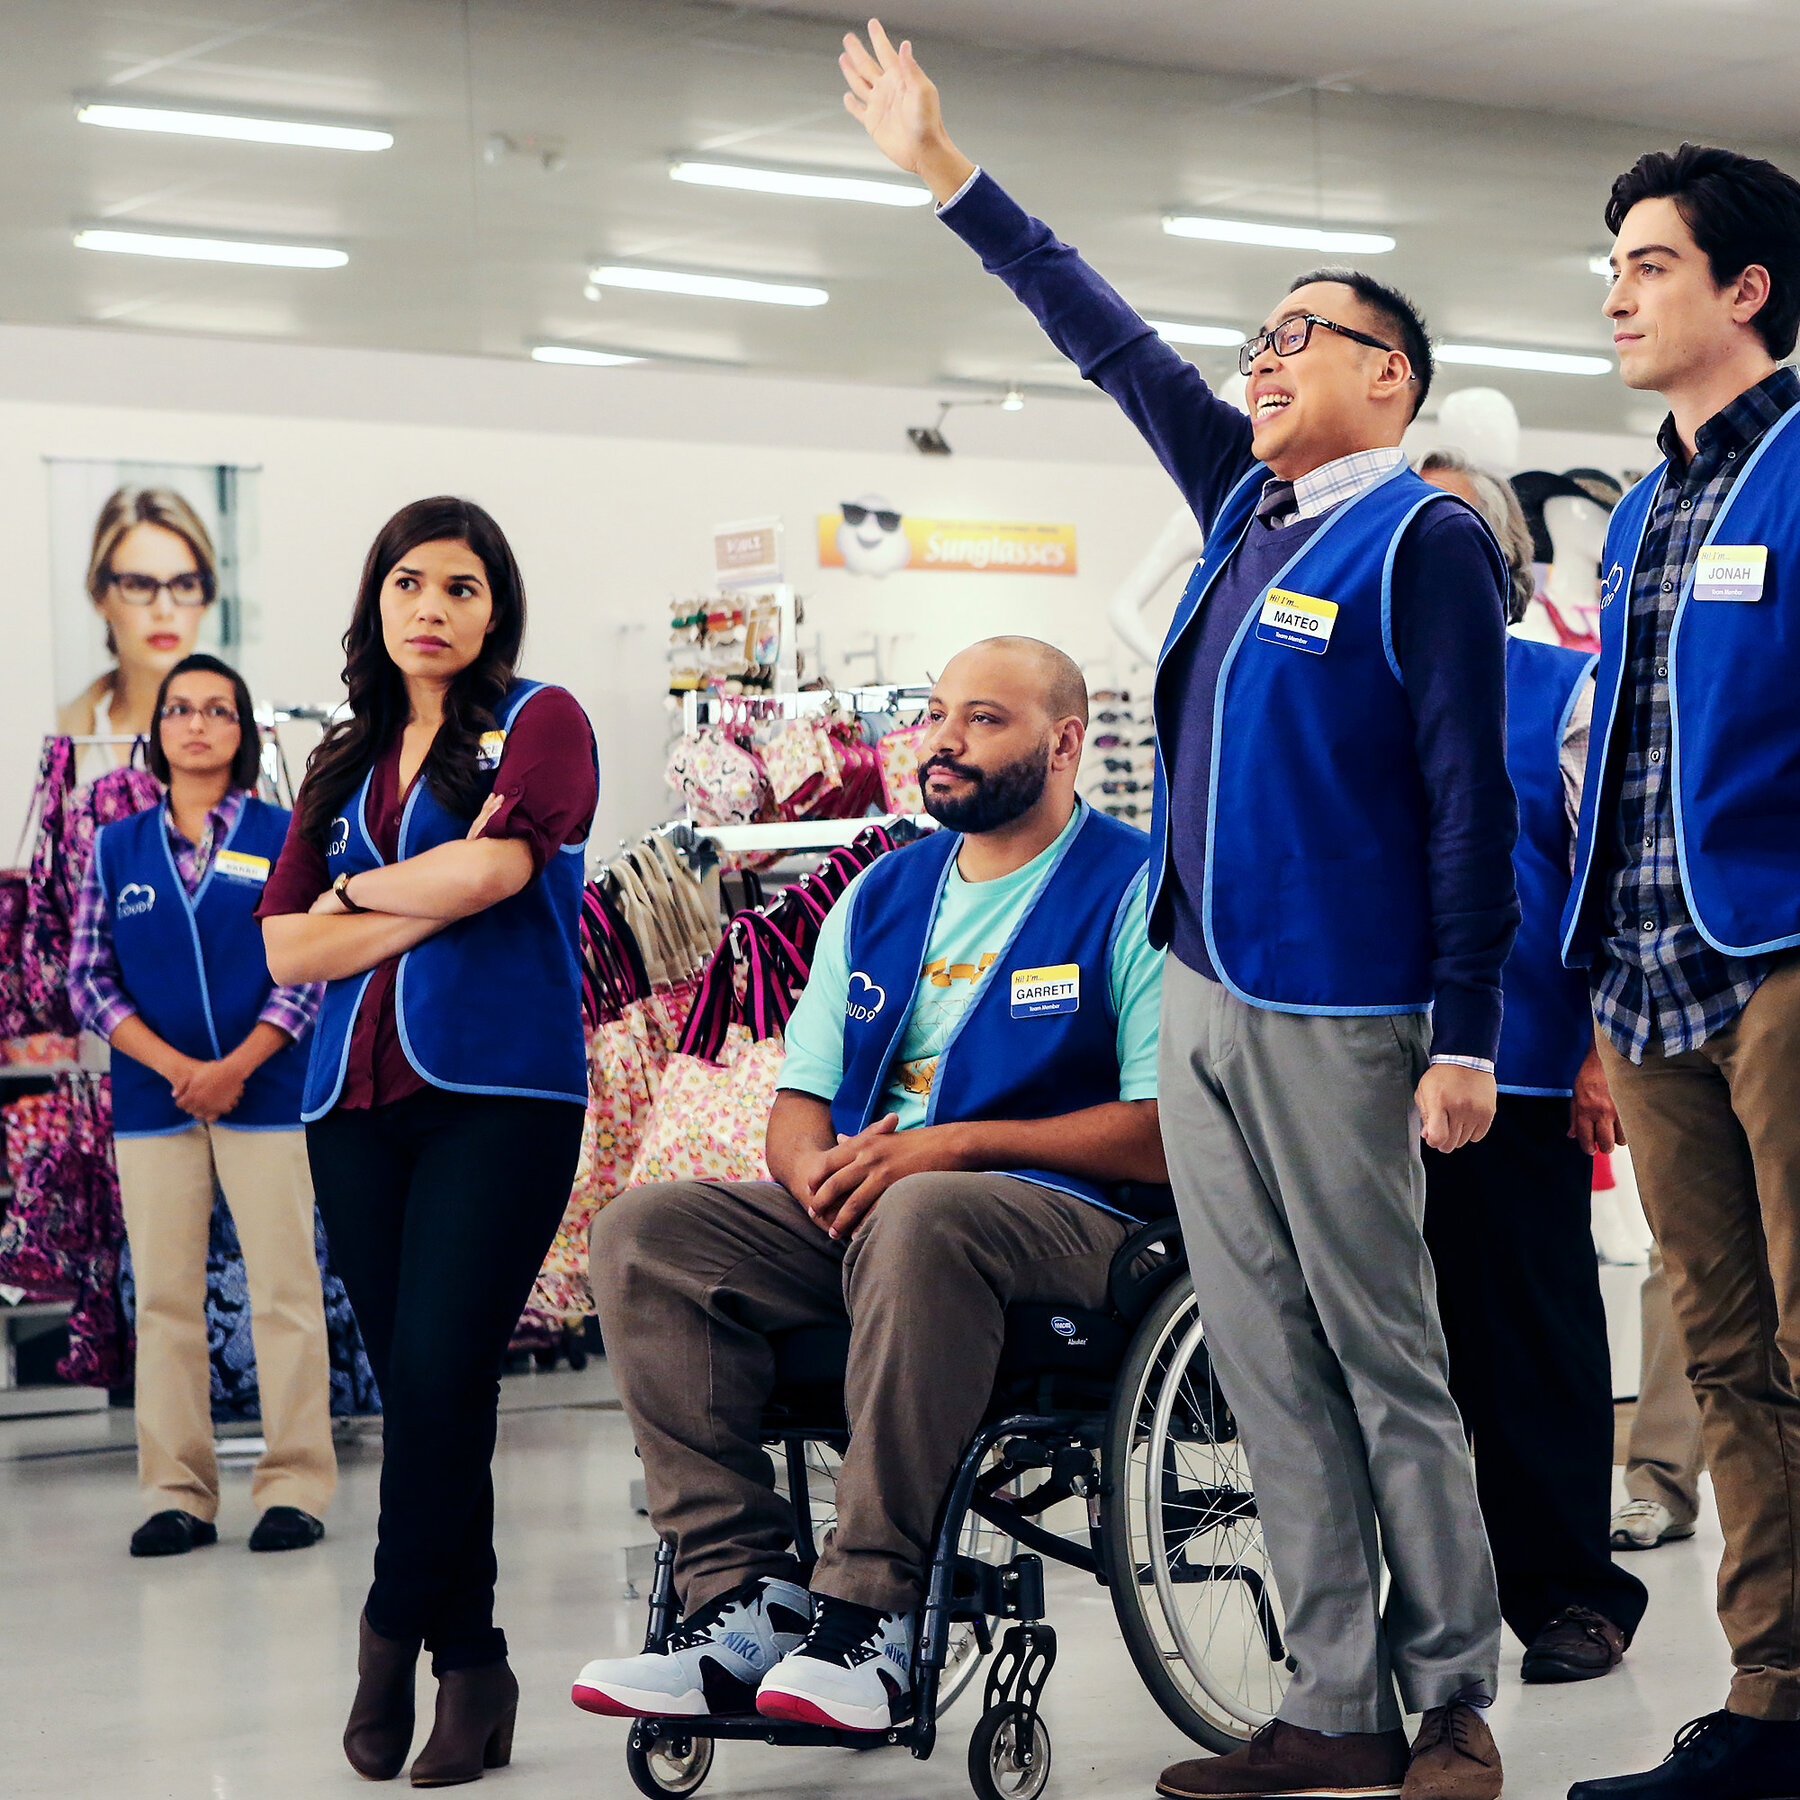 Amy (America Ferrera), Garrett (Colton Dunn), Mateo (Nico Santos), and Jonah (Ben Feldman) watch something offscreen. Amy is standing with her arms crossed, Garrett sits in his wheelchair with his hands in his lap, Mateo is standing with a hand raised in the air and Jonah stands with his hands in his pockets. Superstore. 2015-2021. NBC.